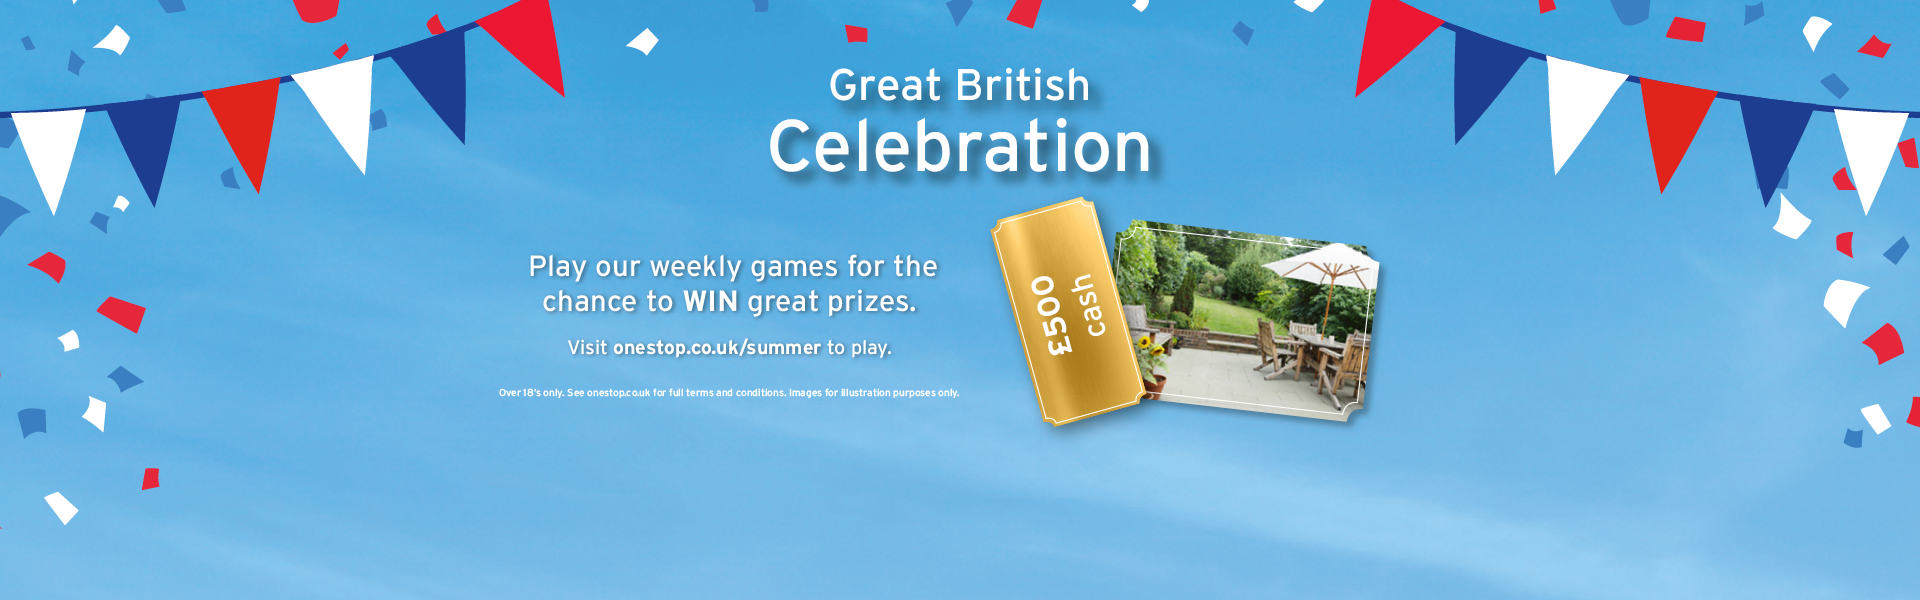 One Stop launches summer campaign with a Great British Celebration